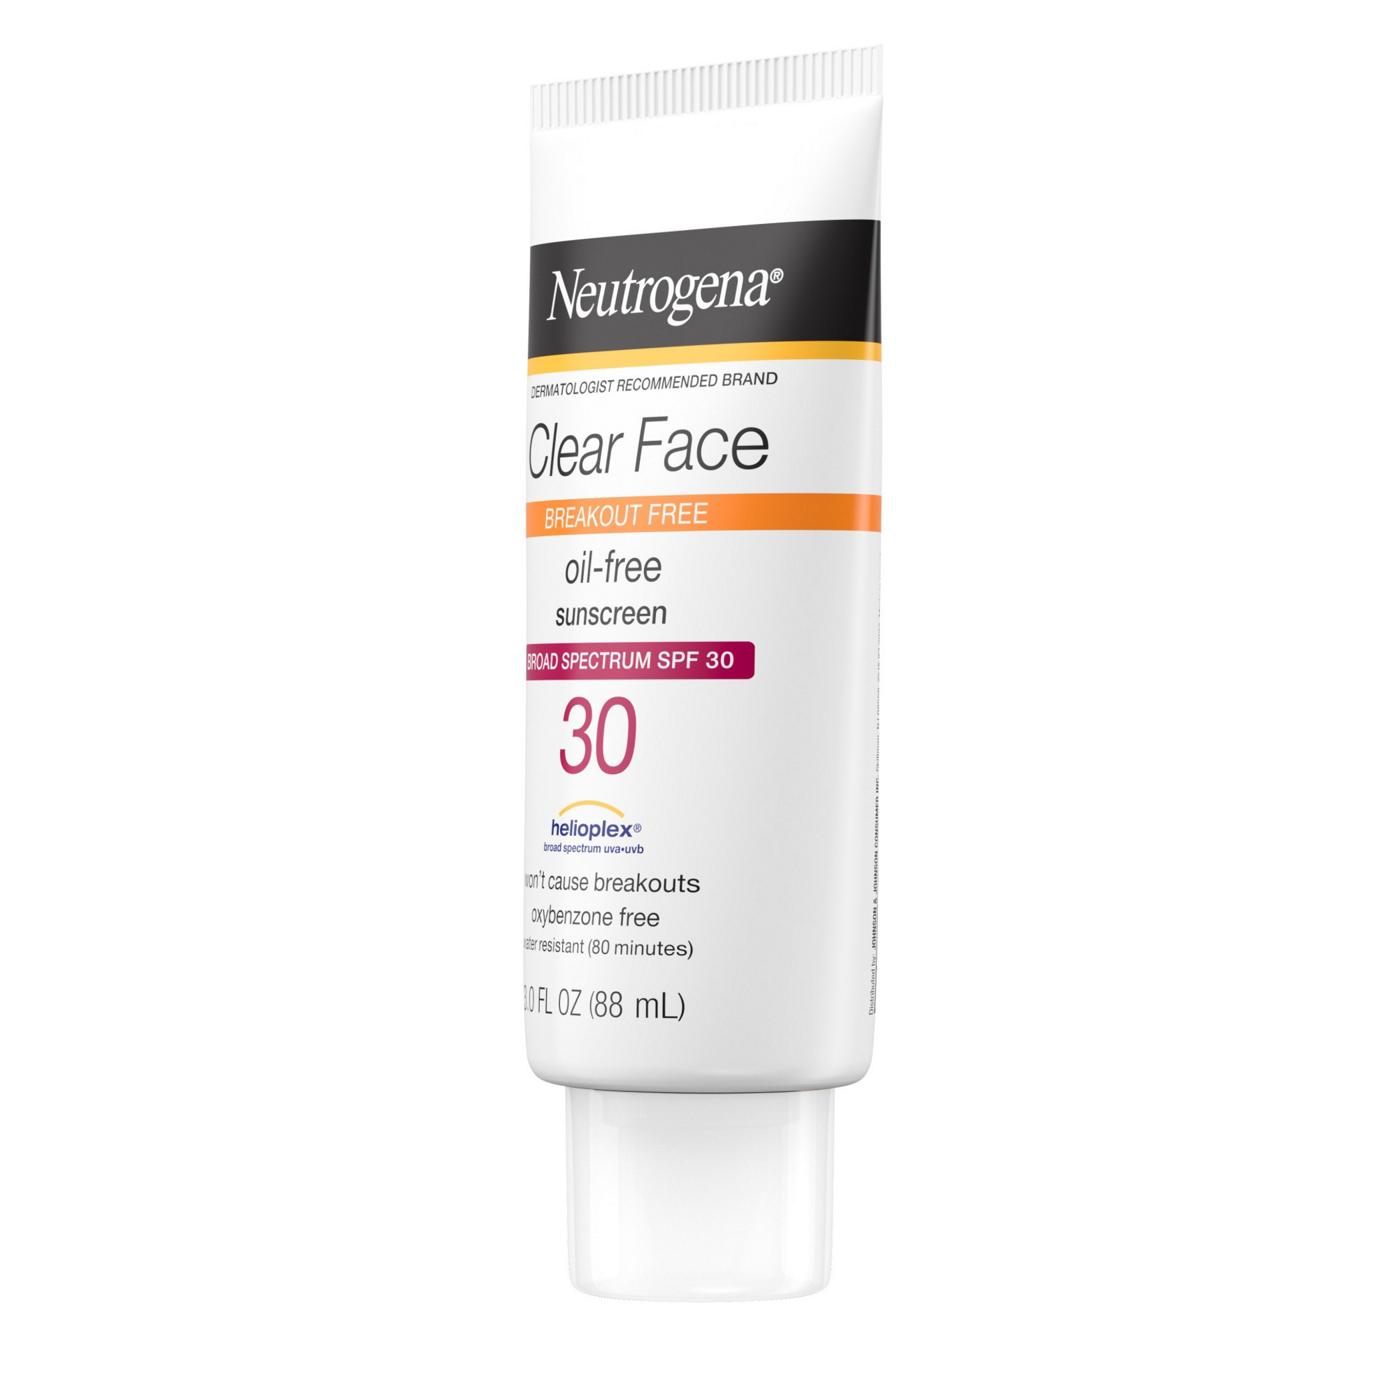 Neutrogena Clear Face Oil-Free Sunscreen Lotion - SPF 30; image 6 of 7